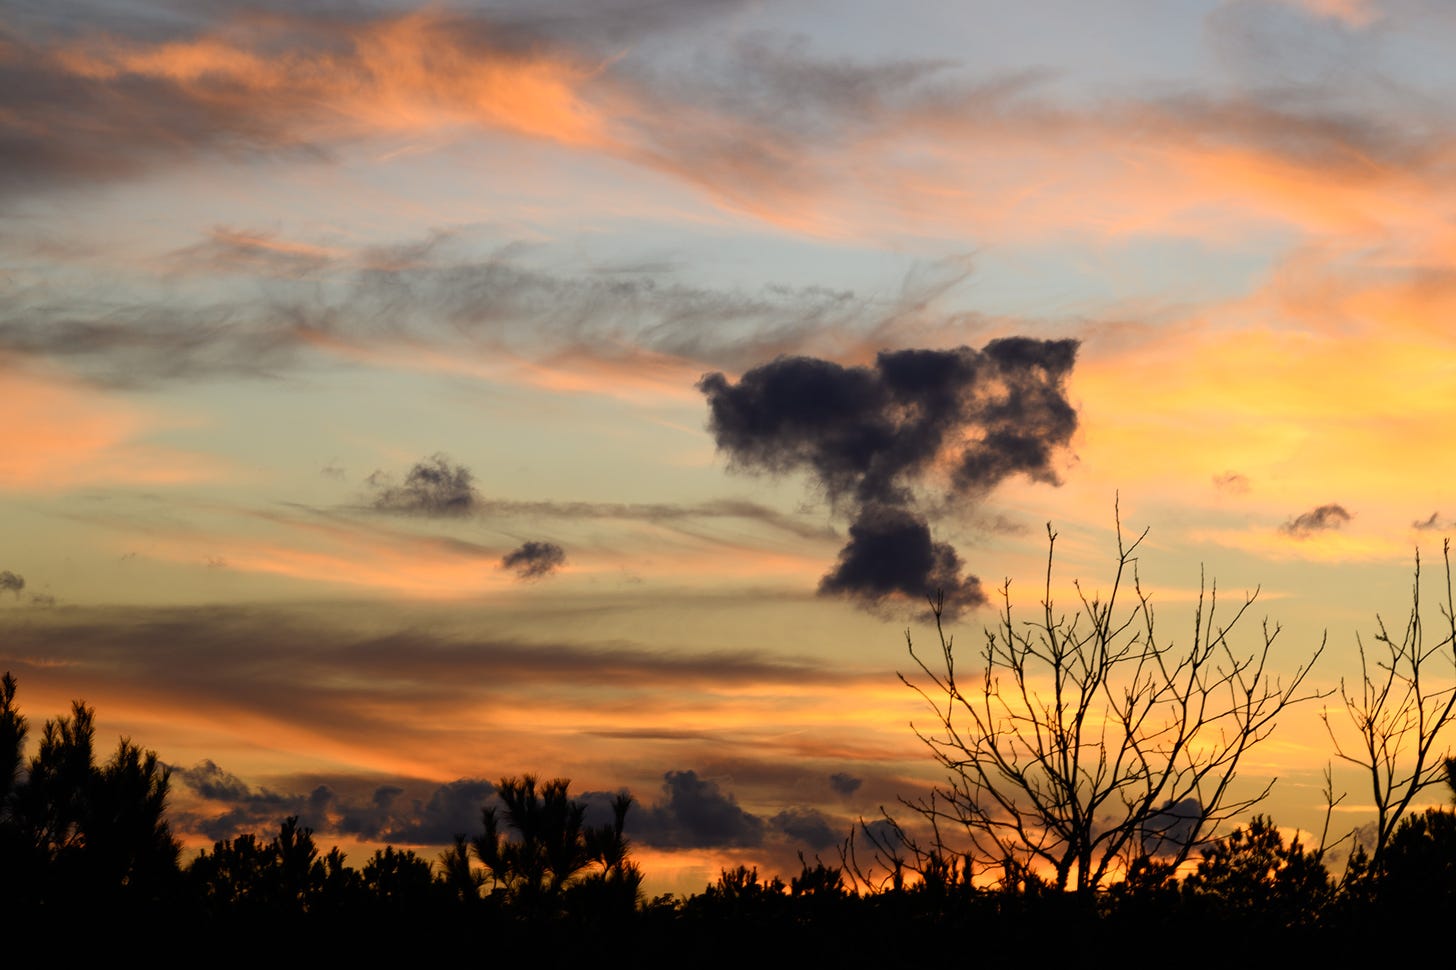 A peachy, blue, and yellow sunset against a pale blue sky with one dark mushroom shaped cloud in the center